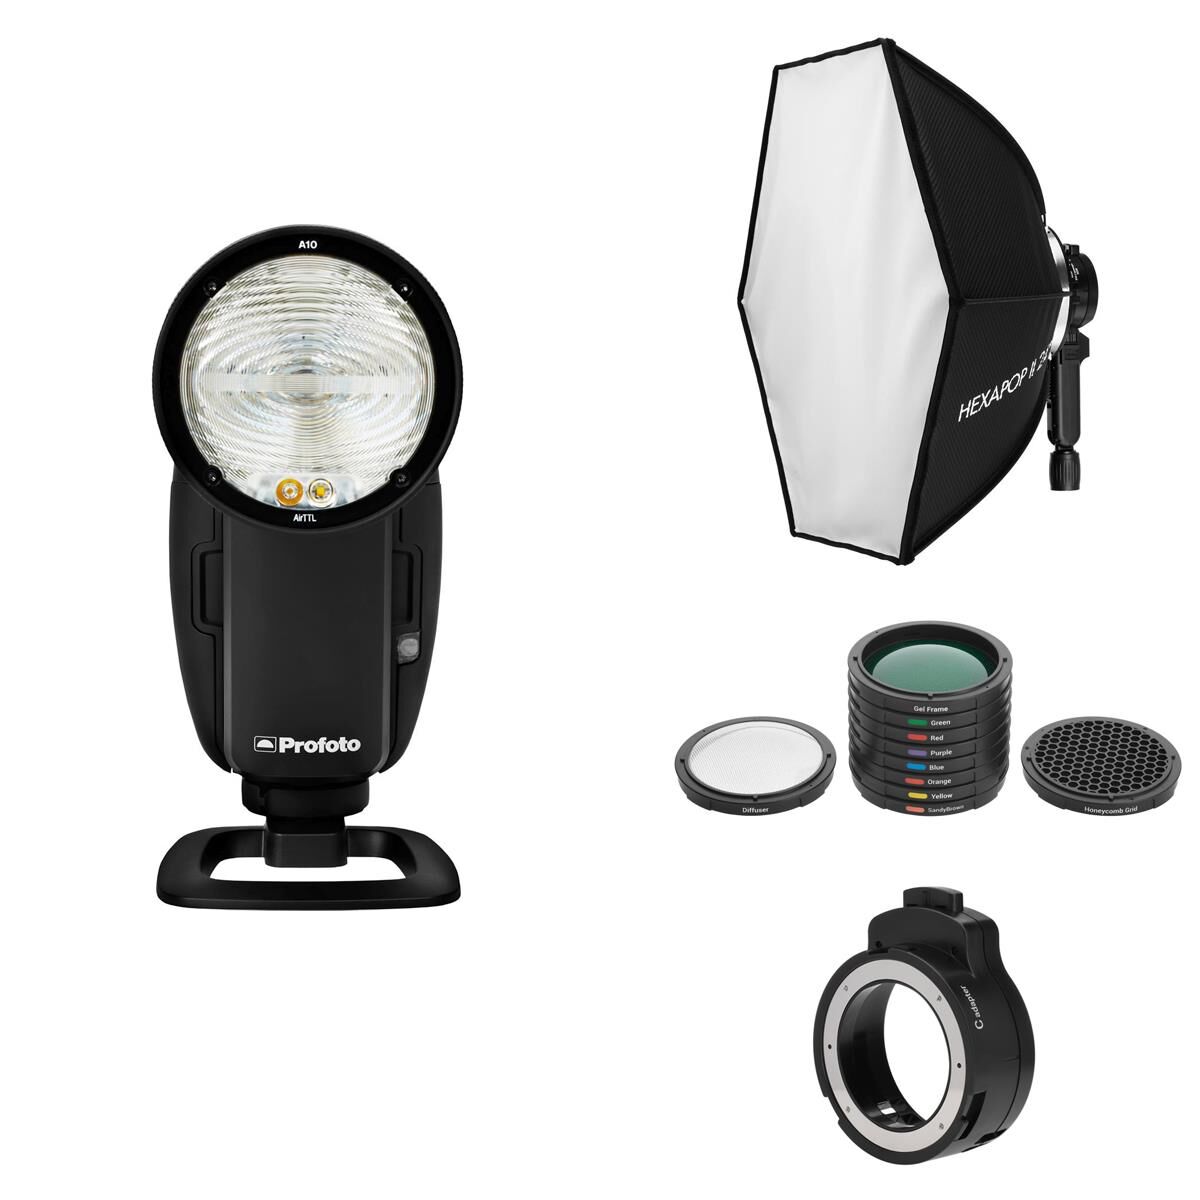 Profoto A10 On and Off Camera Flash for Fujifilm Camera with Accessories Bundle